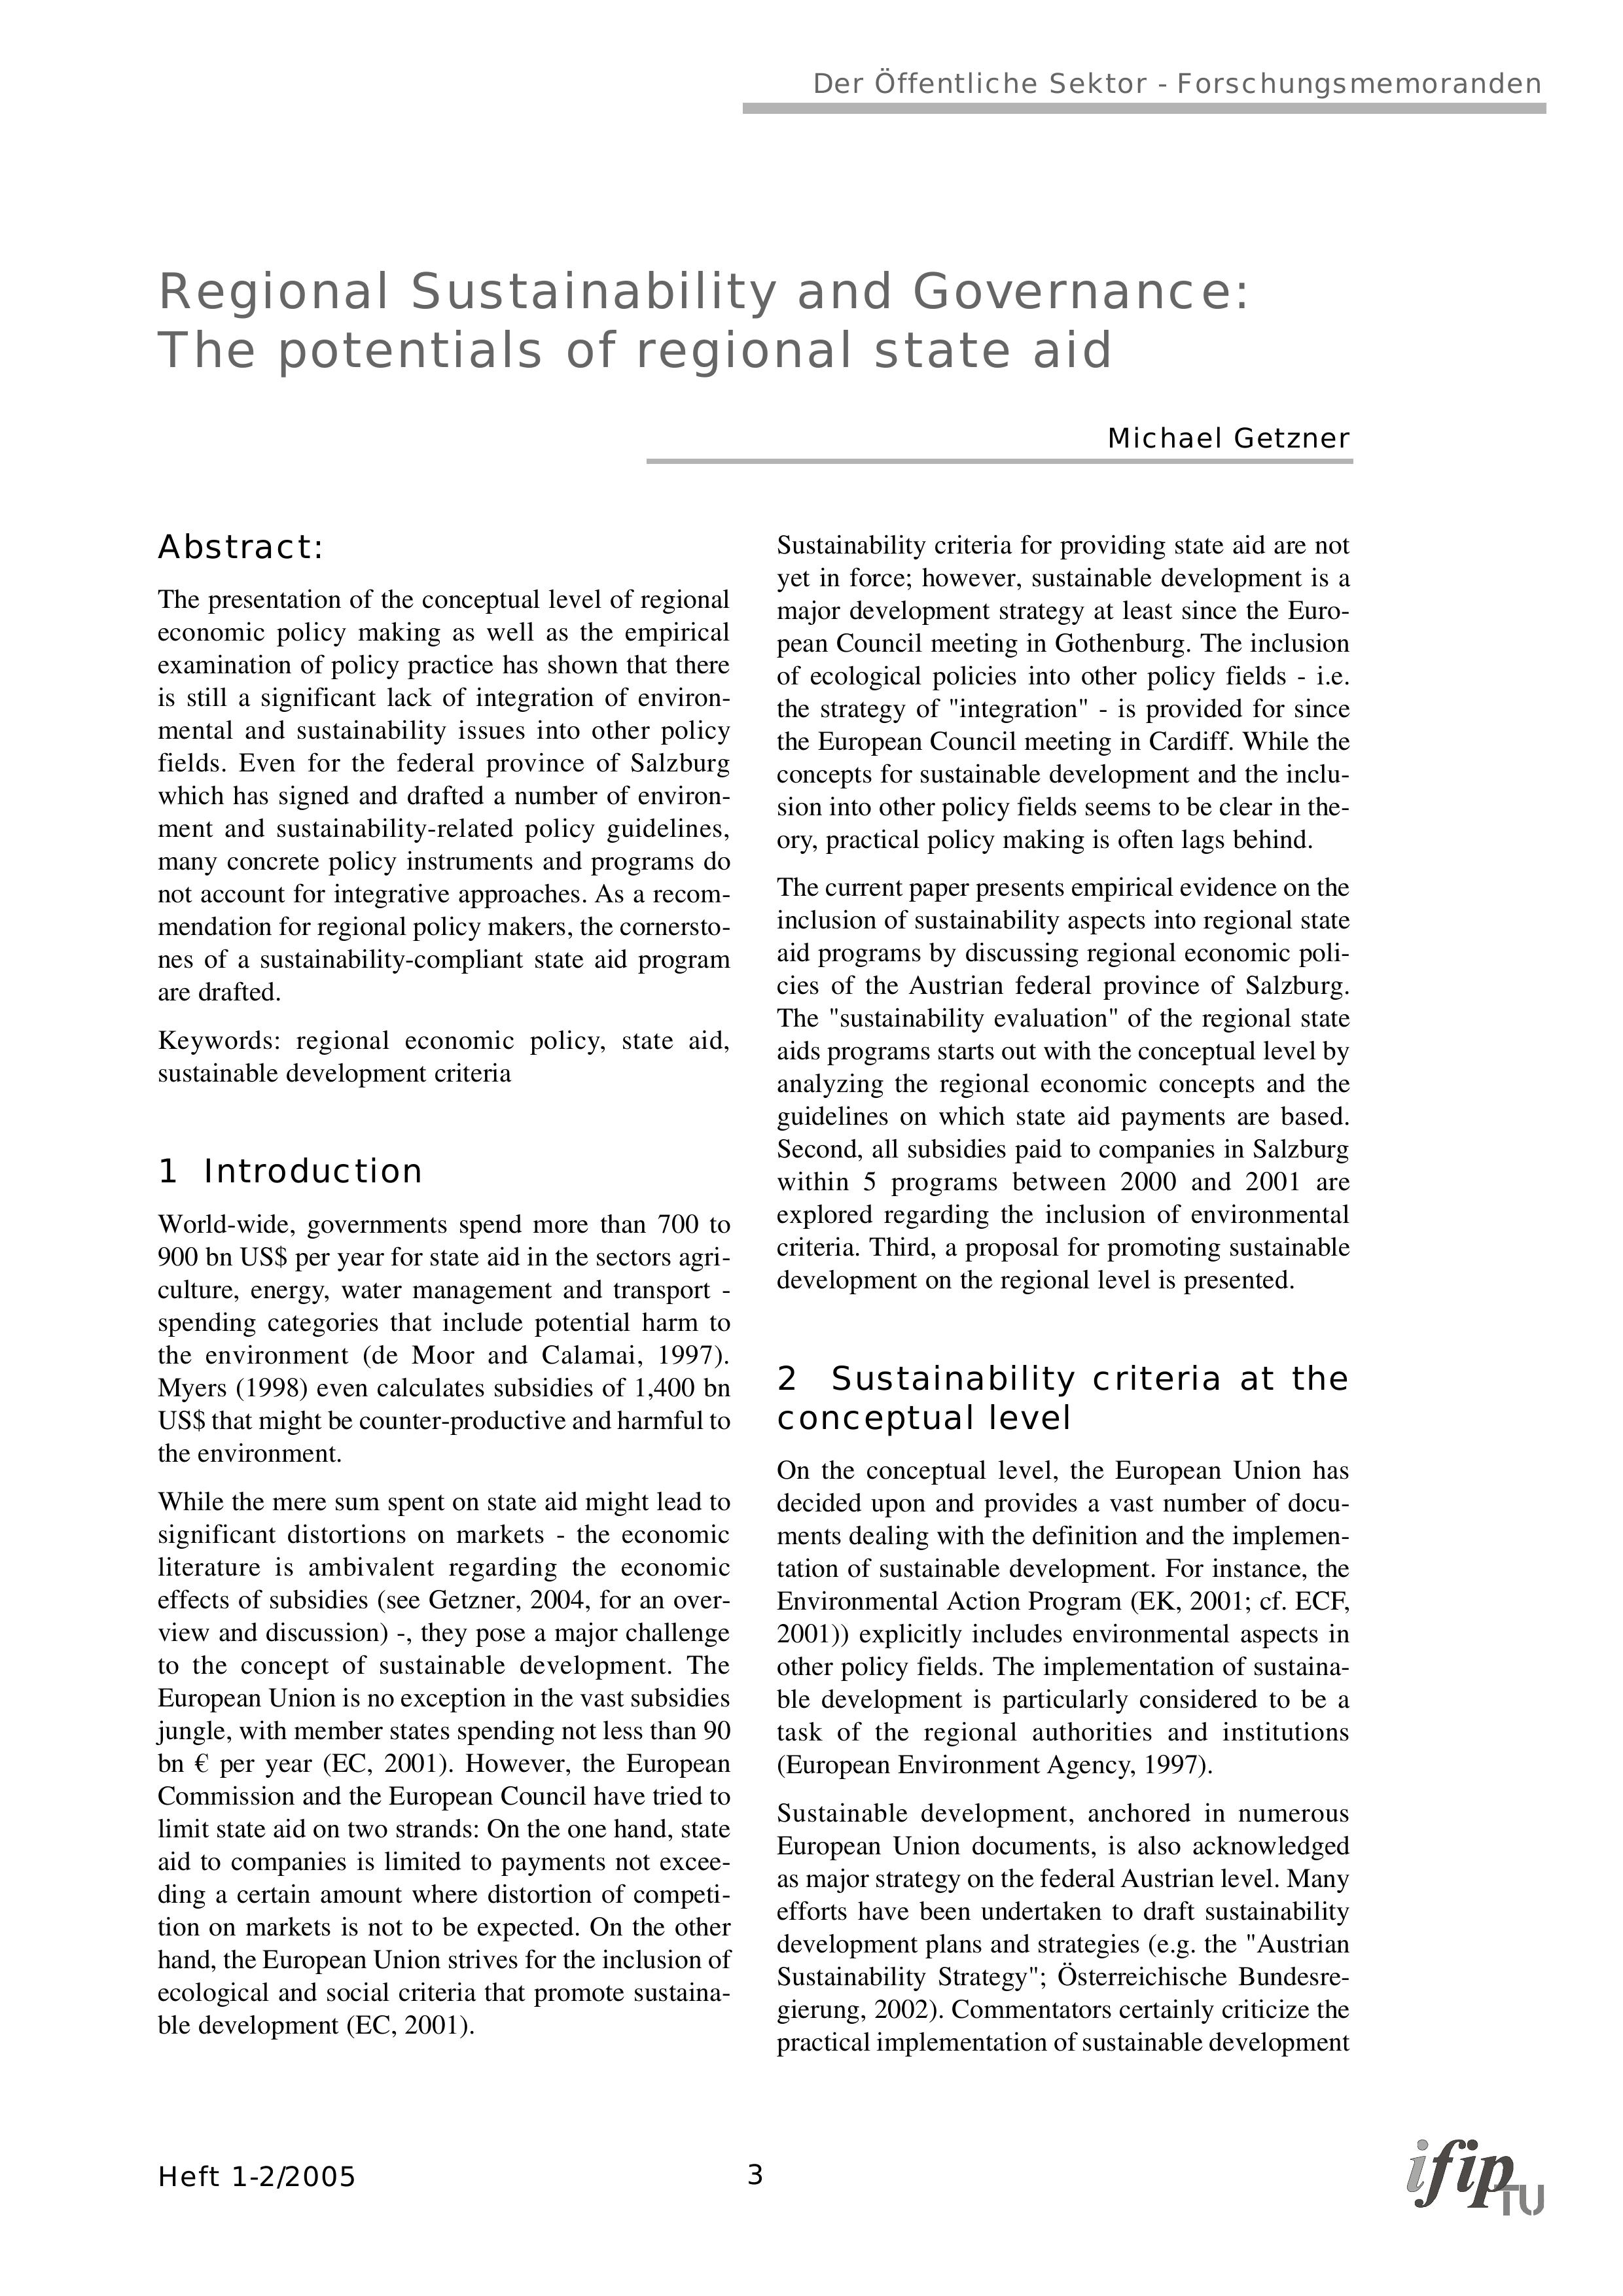 Regional Sustainability and Governance: The potentials of regional state aid